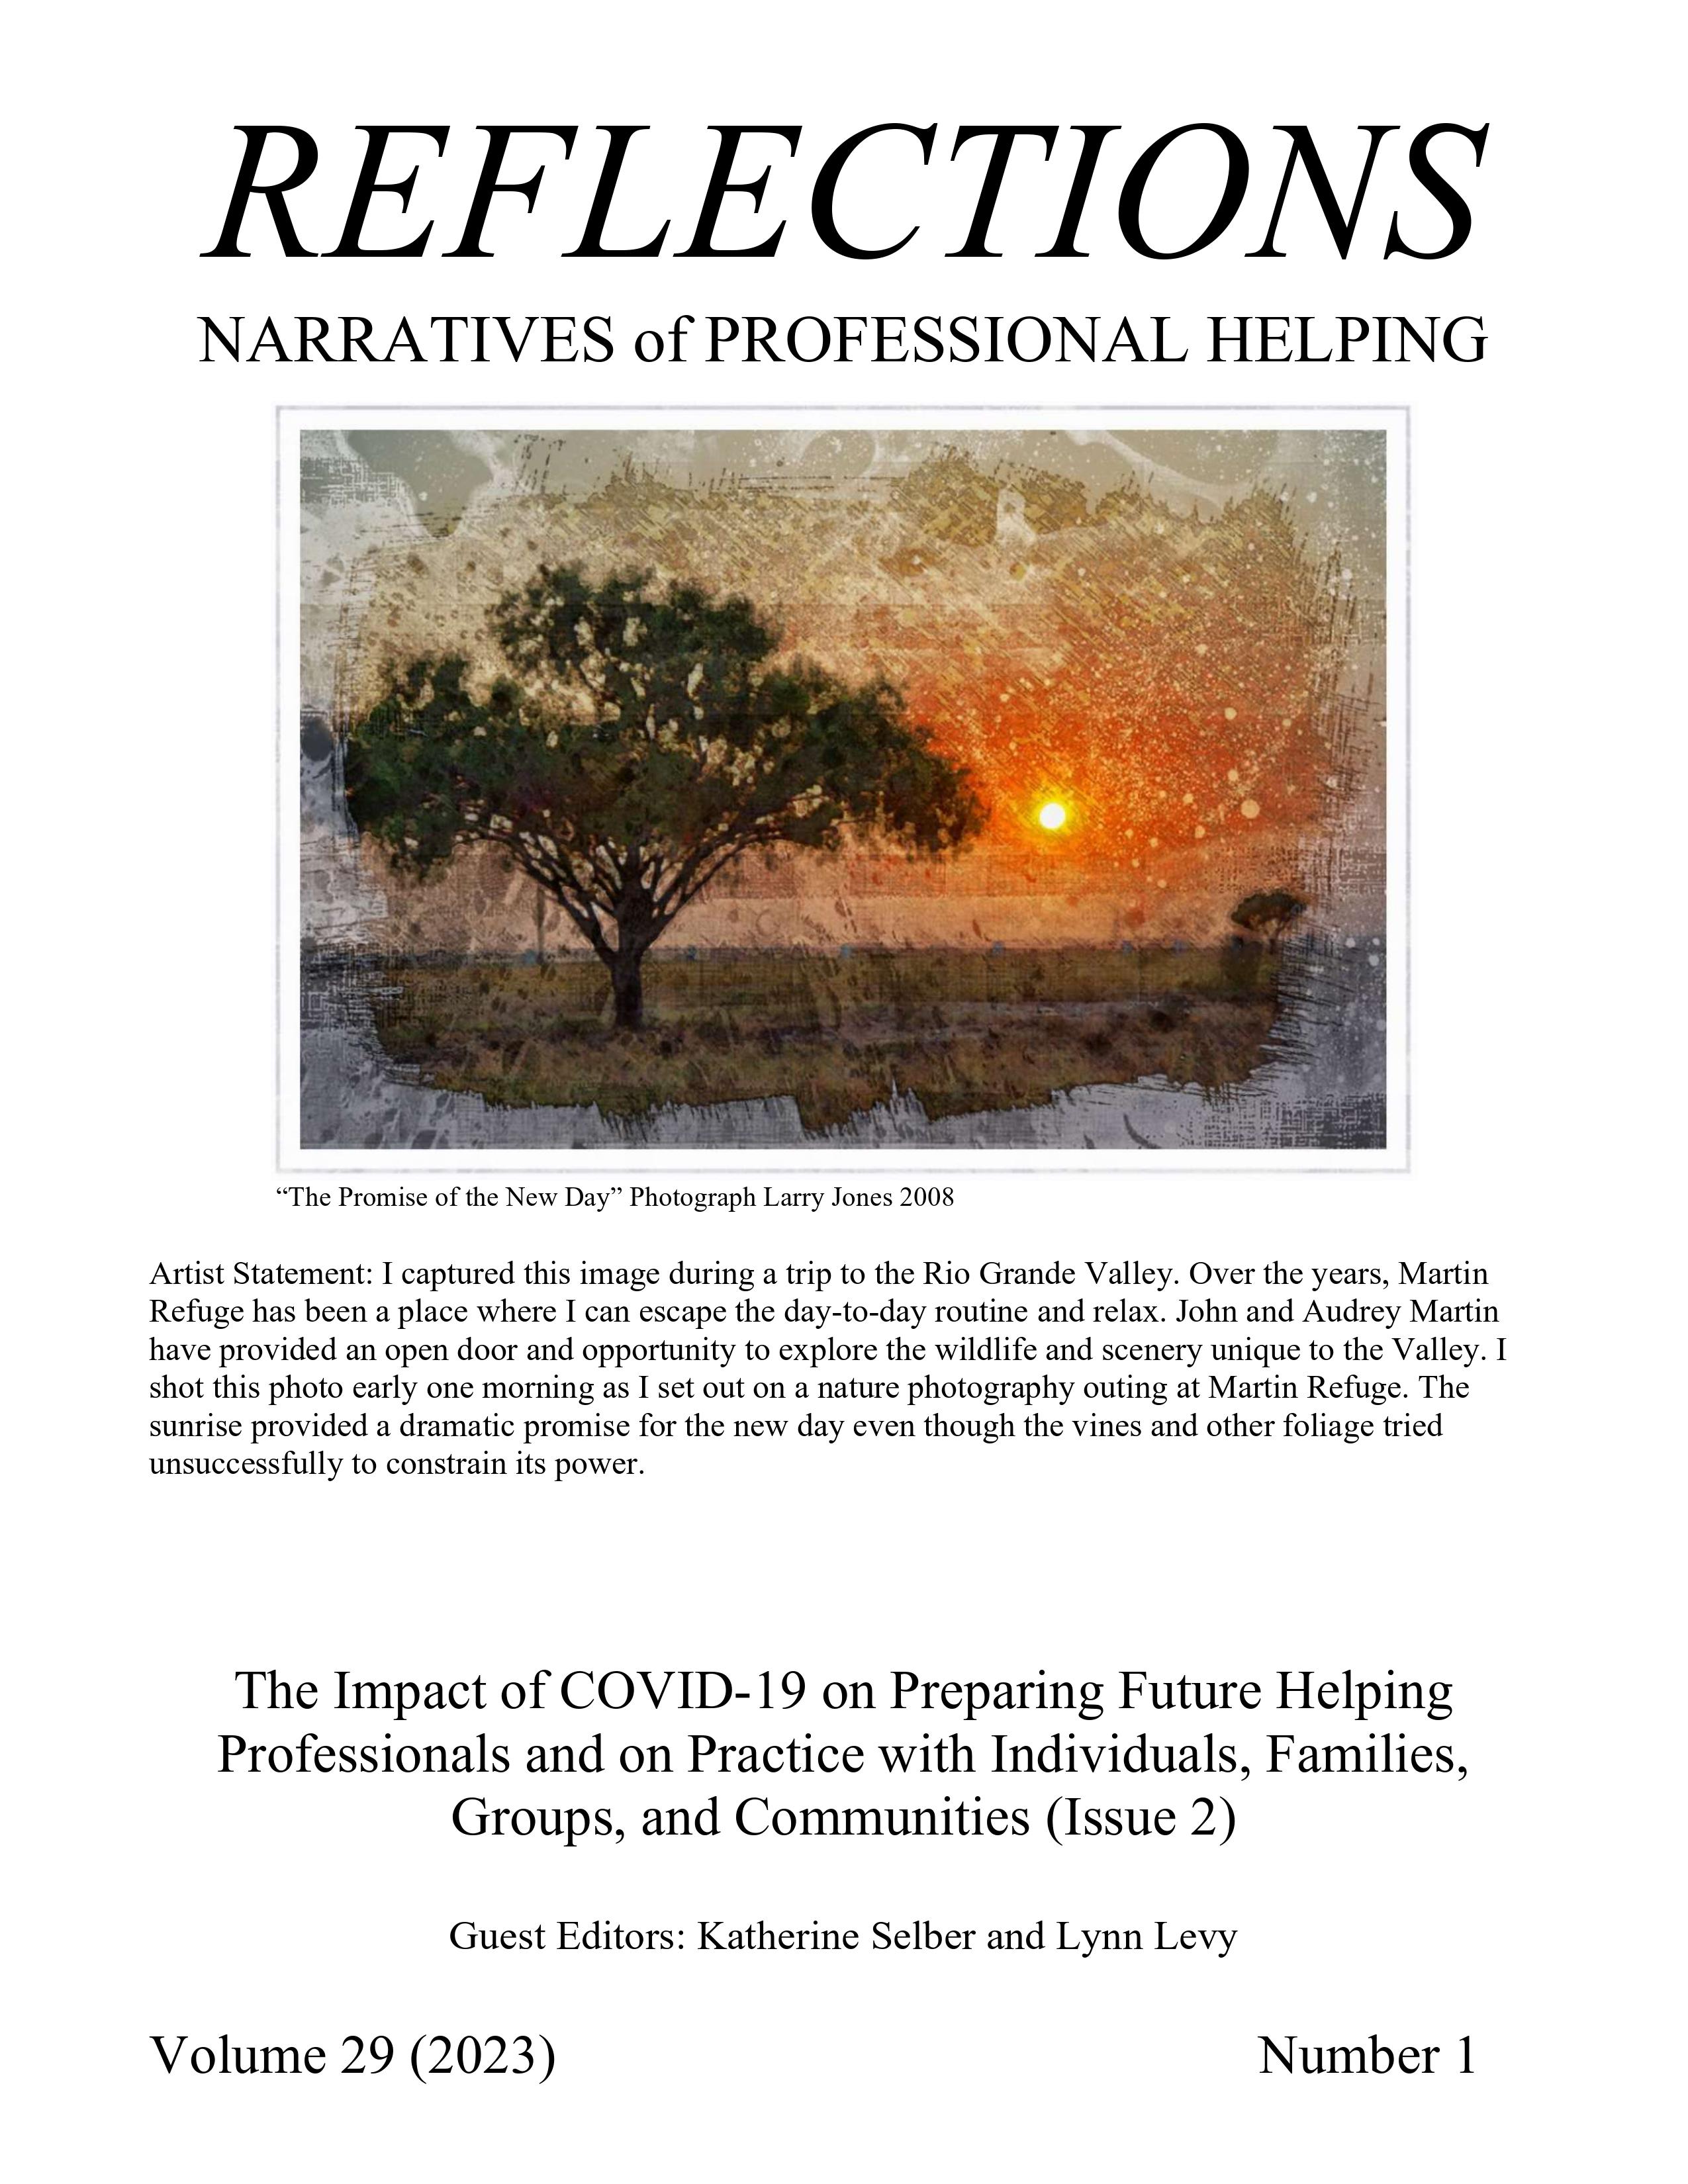 					View Vol. 29 No. 1 (2023): Special Issue on the Impact of COVID-19 on Preparing Future Helping Professionals and on Practice with Individuals, Families, Groups and Communities (Issue 2)
				